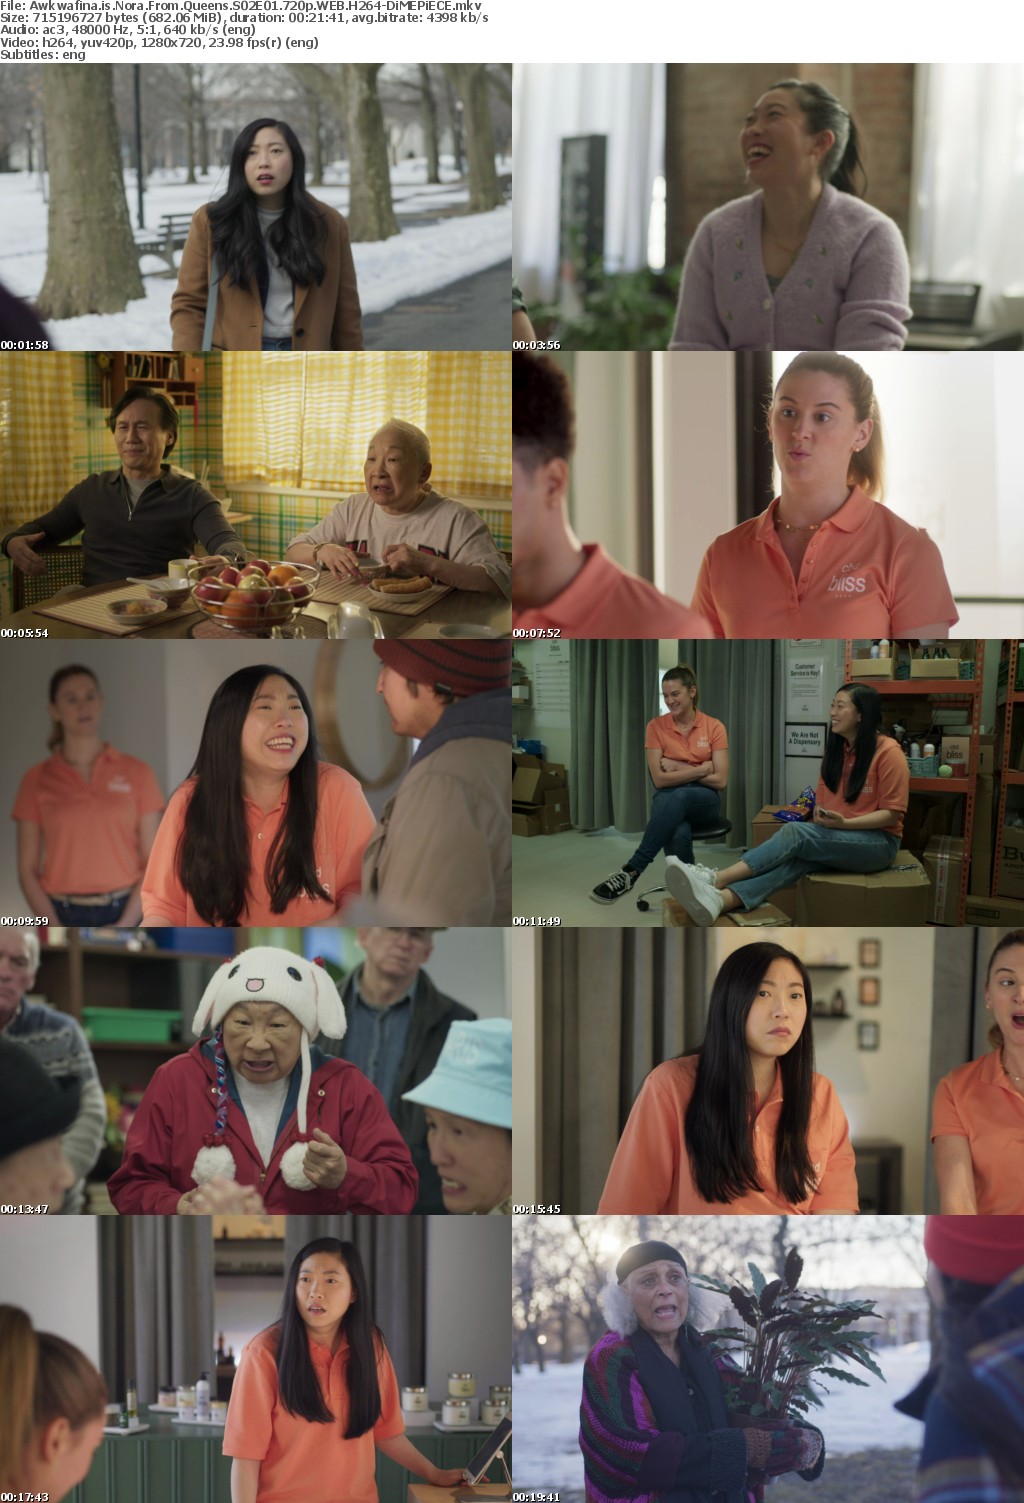 Awkwafina is Nora From Queens S02E01 720p WEB H264-DiMEPiECE